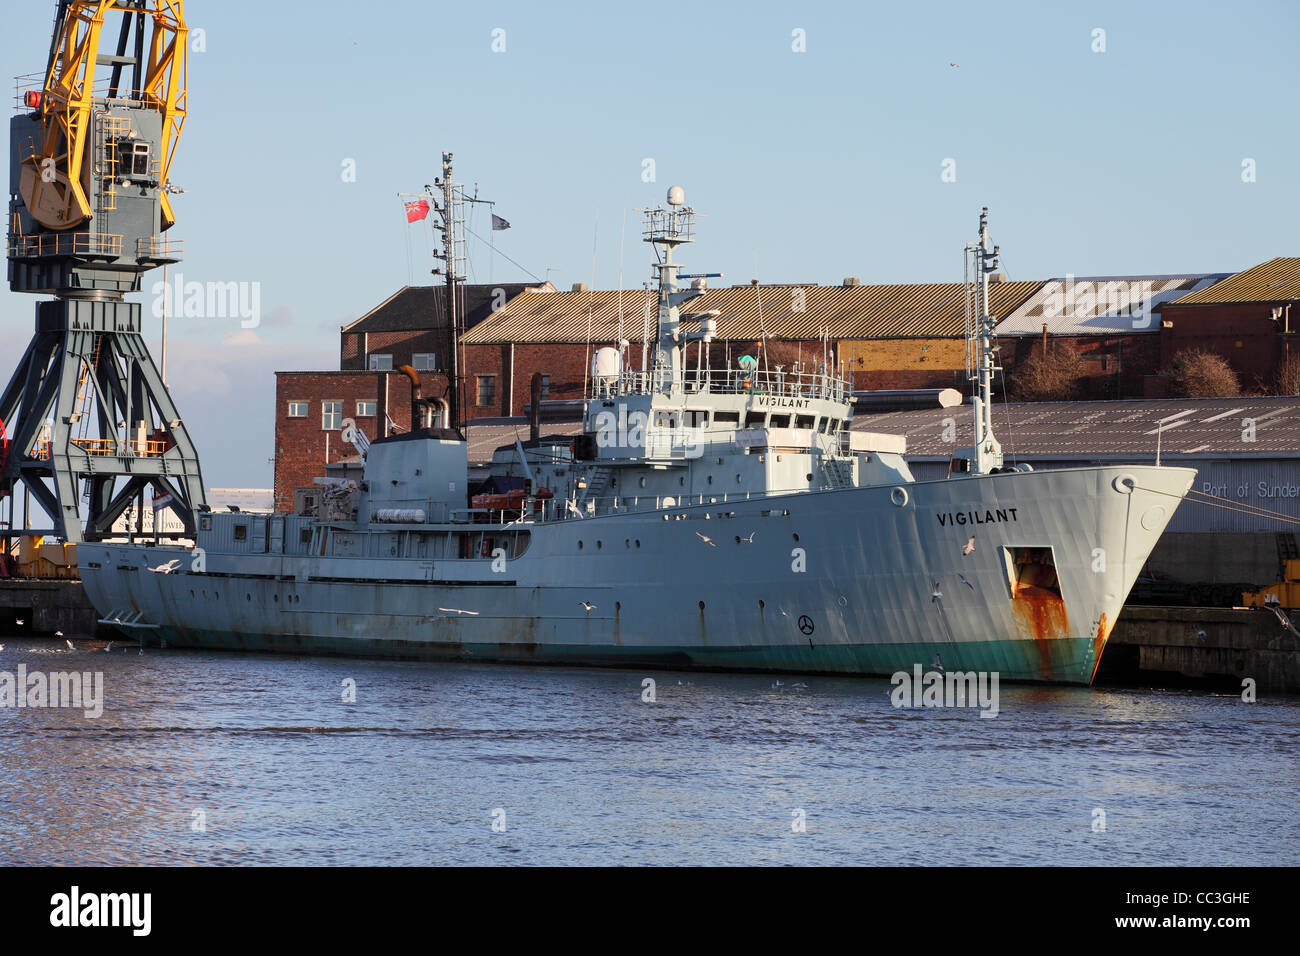 Ex fishery protection Vessel Vigilant docked on the river Wear at Hendon, Port of Sunderland Stock Photo